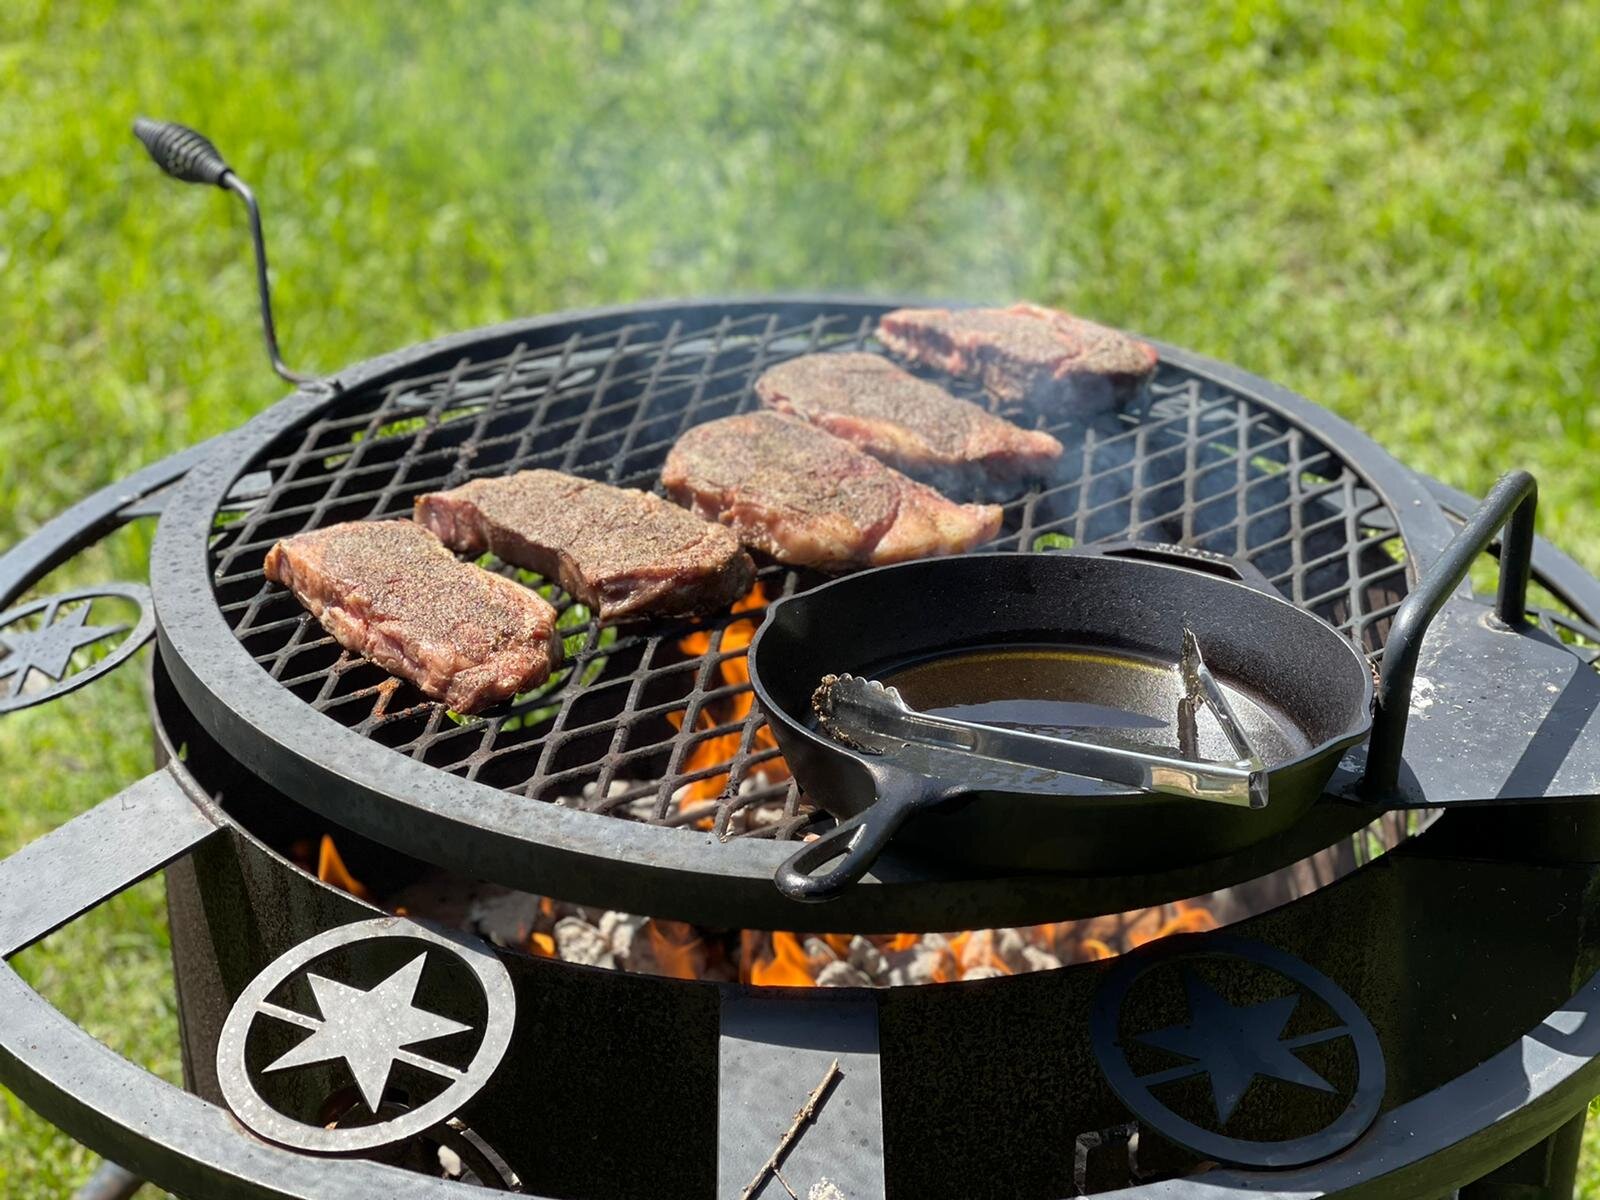 Steaks cooking on firepit with cast iron skillet